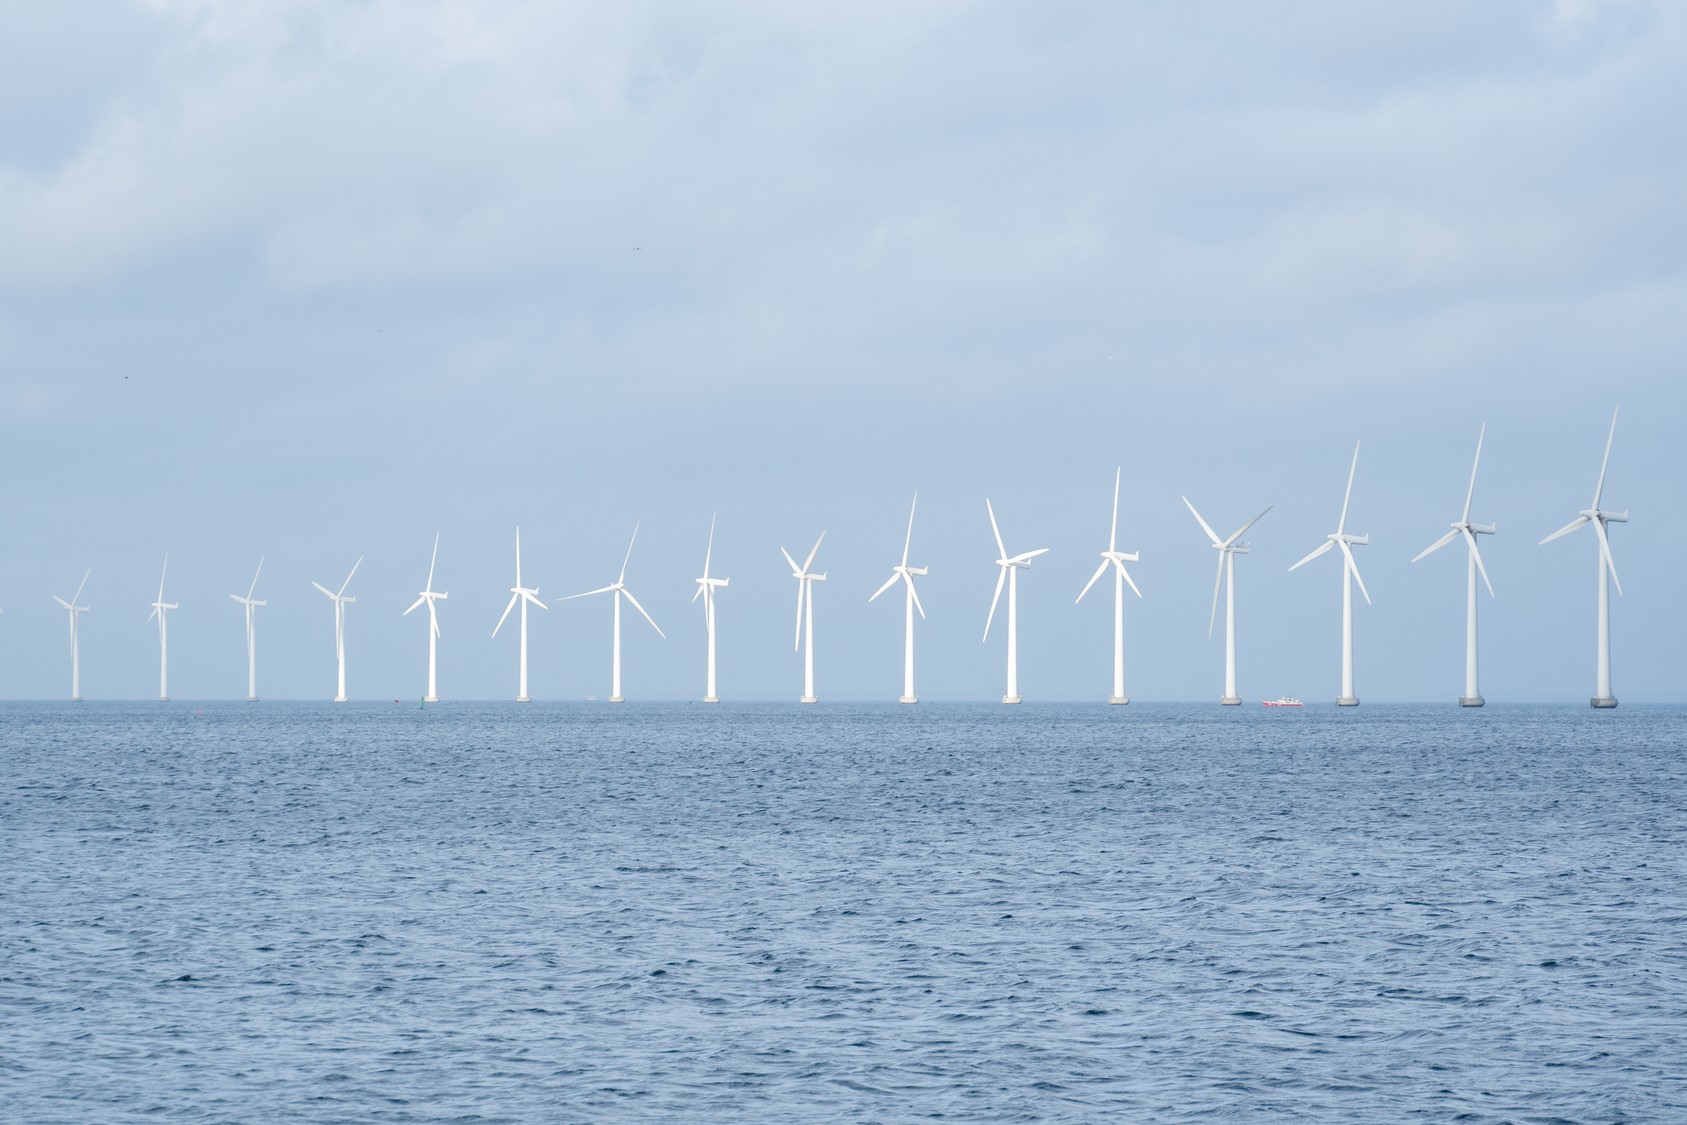 From a distance: wind turbines in a row above the surface of water